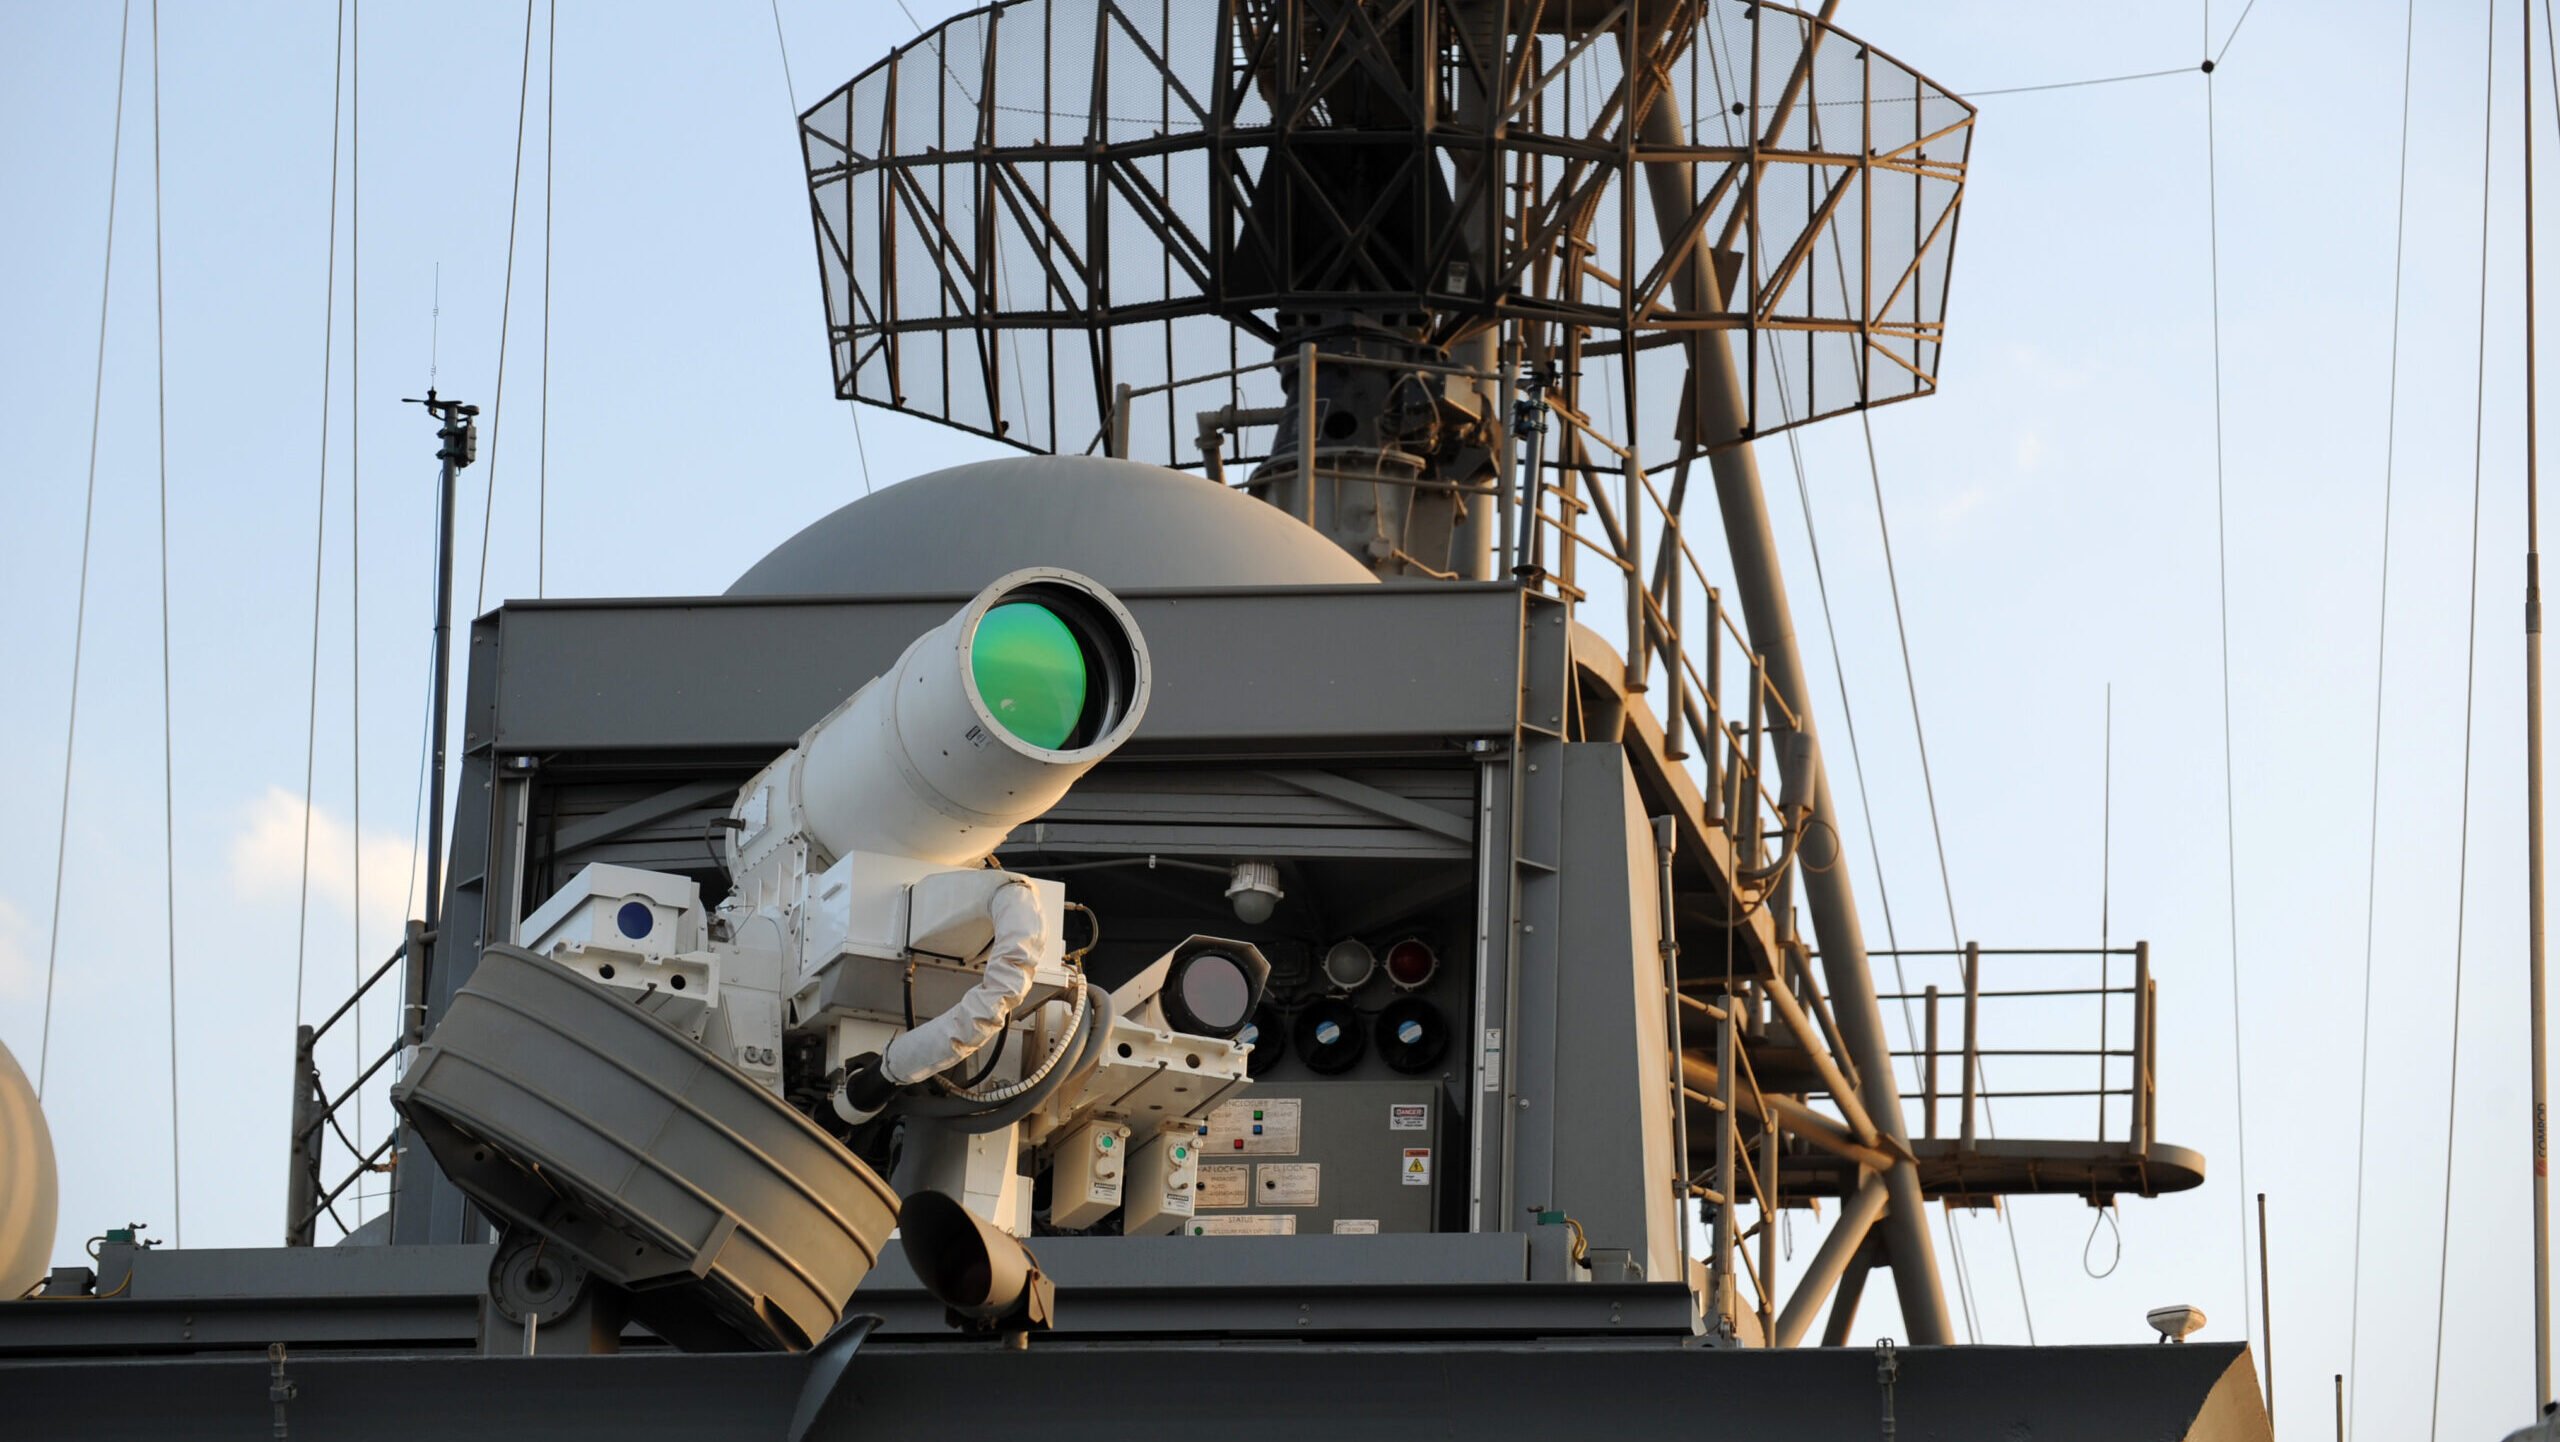 ‘It’s hard’: Navy needs to be realistic about laser weapons, admiral says